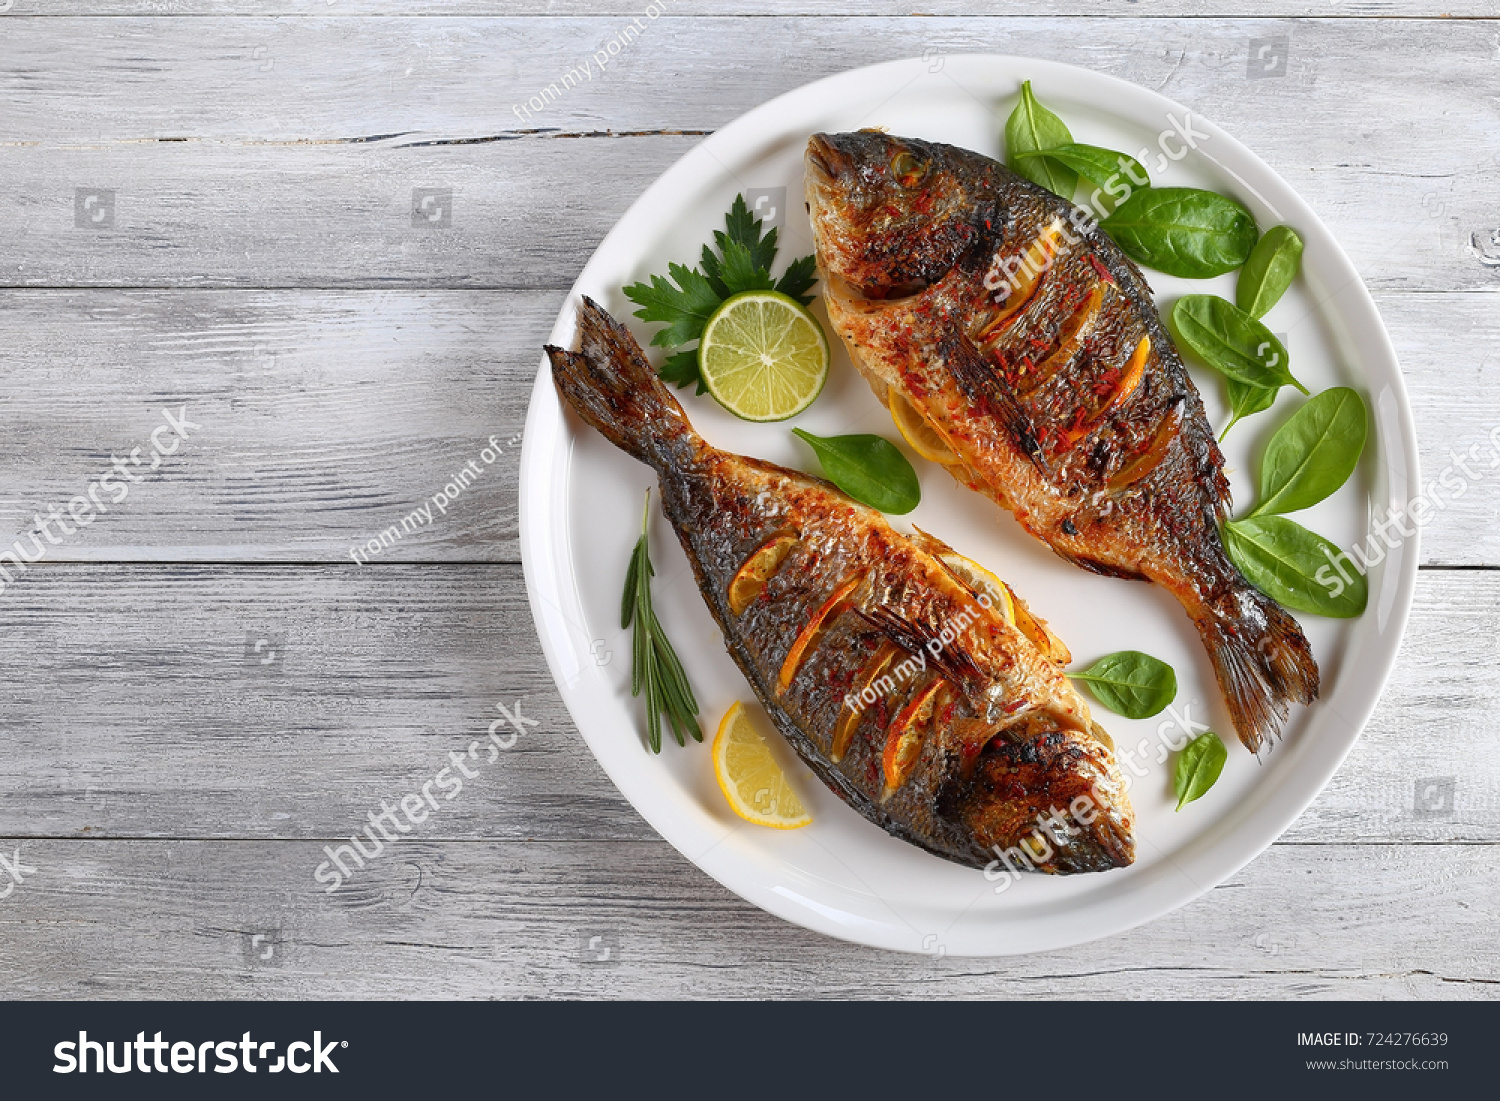 delicious grilled dorado or sea bream fish with lemon and orange slices, spices, fresh parsley and spinach on white platter on old wooden table, horizontal view from above #724276639